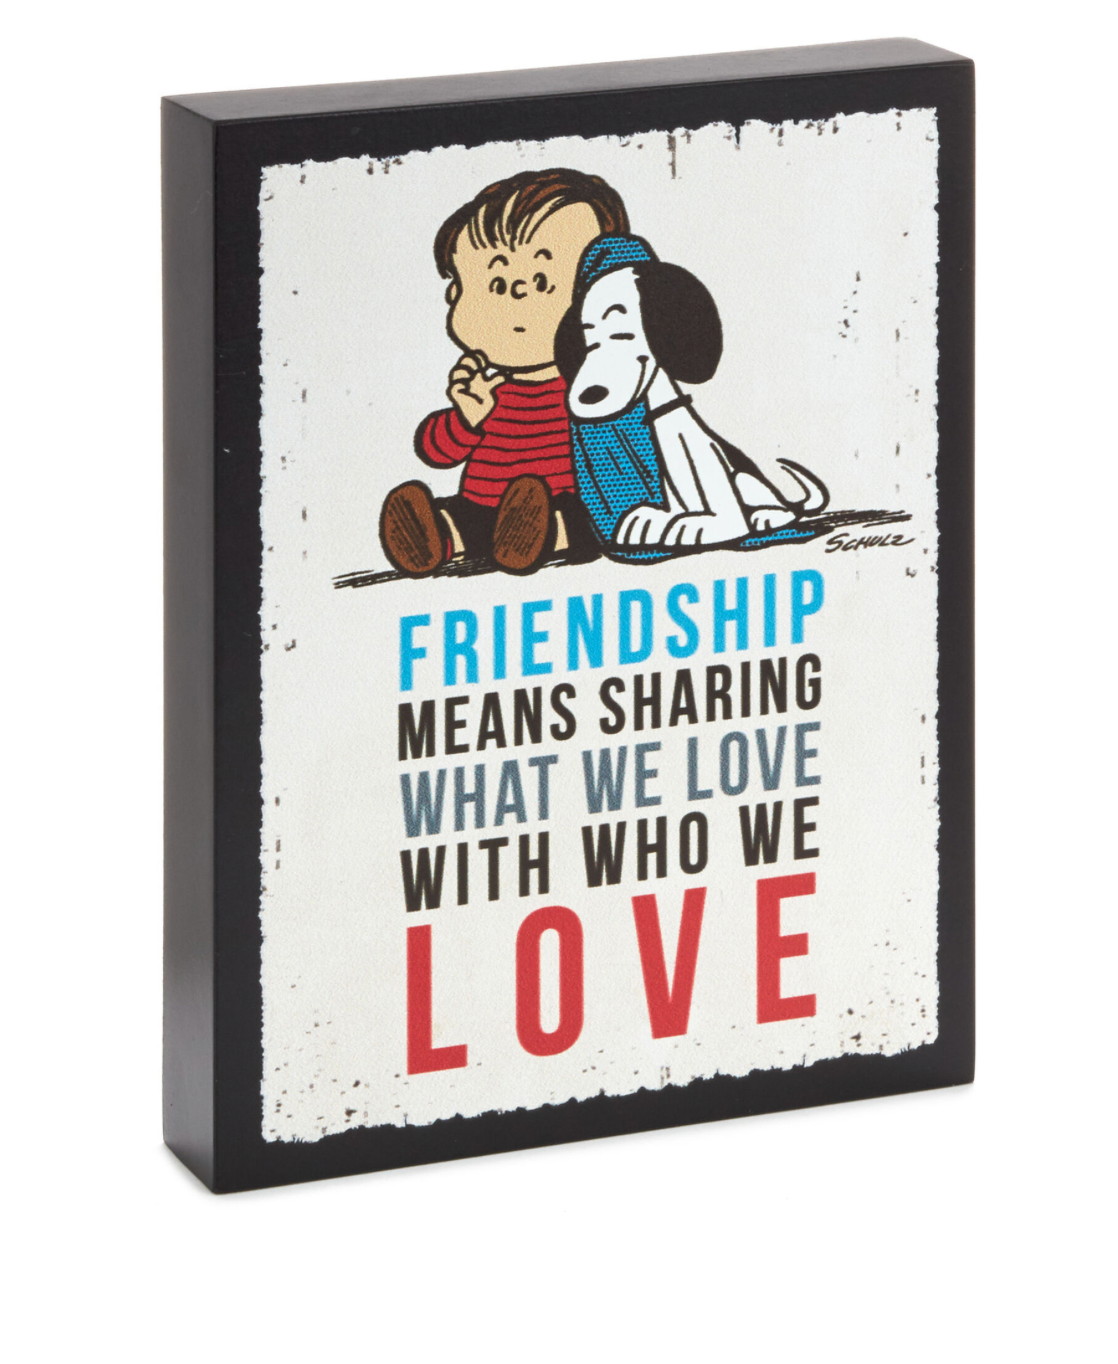 Hallmark Peanuts Linus and Snoopy Friendship Wood Quote Sign New